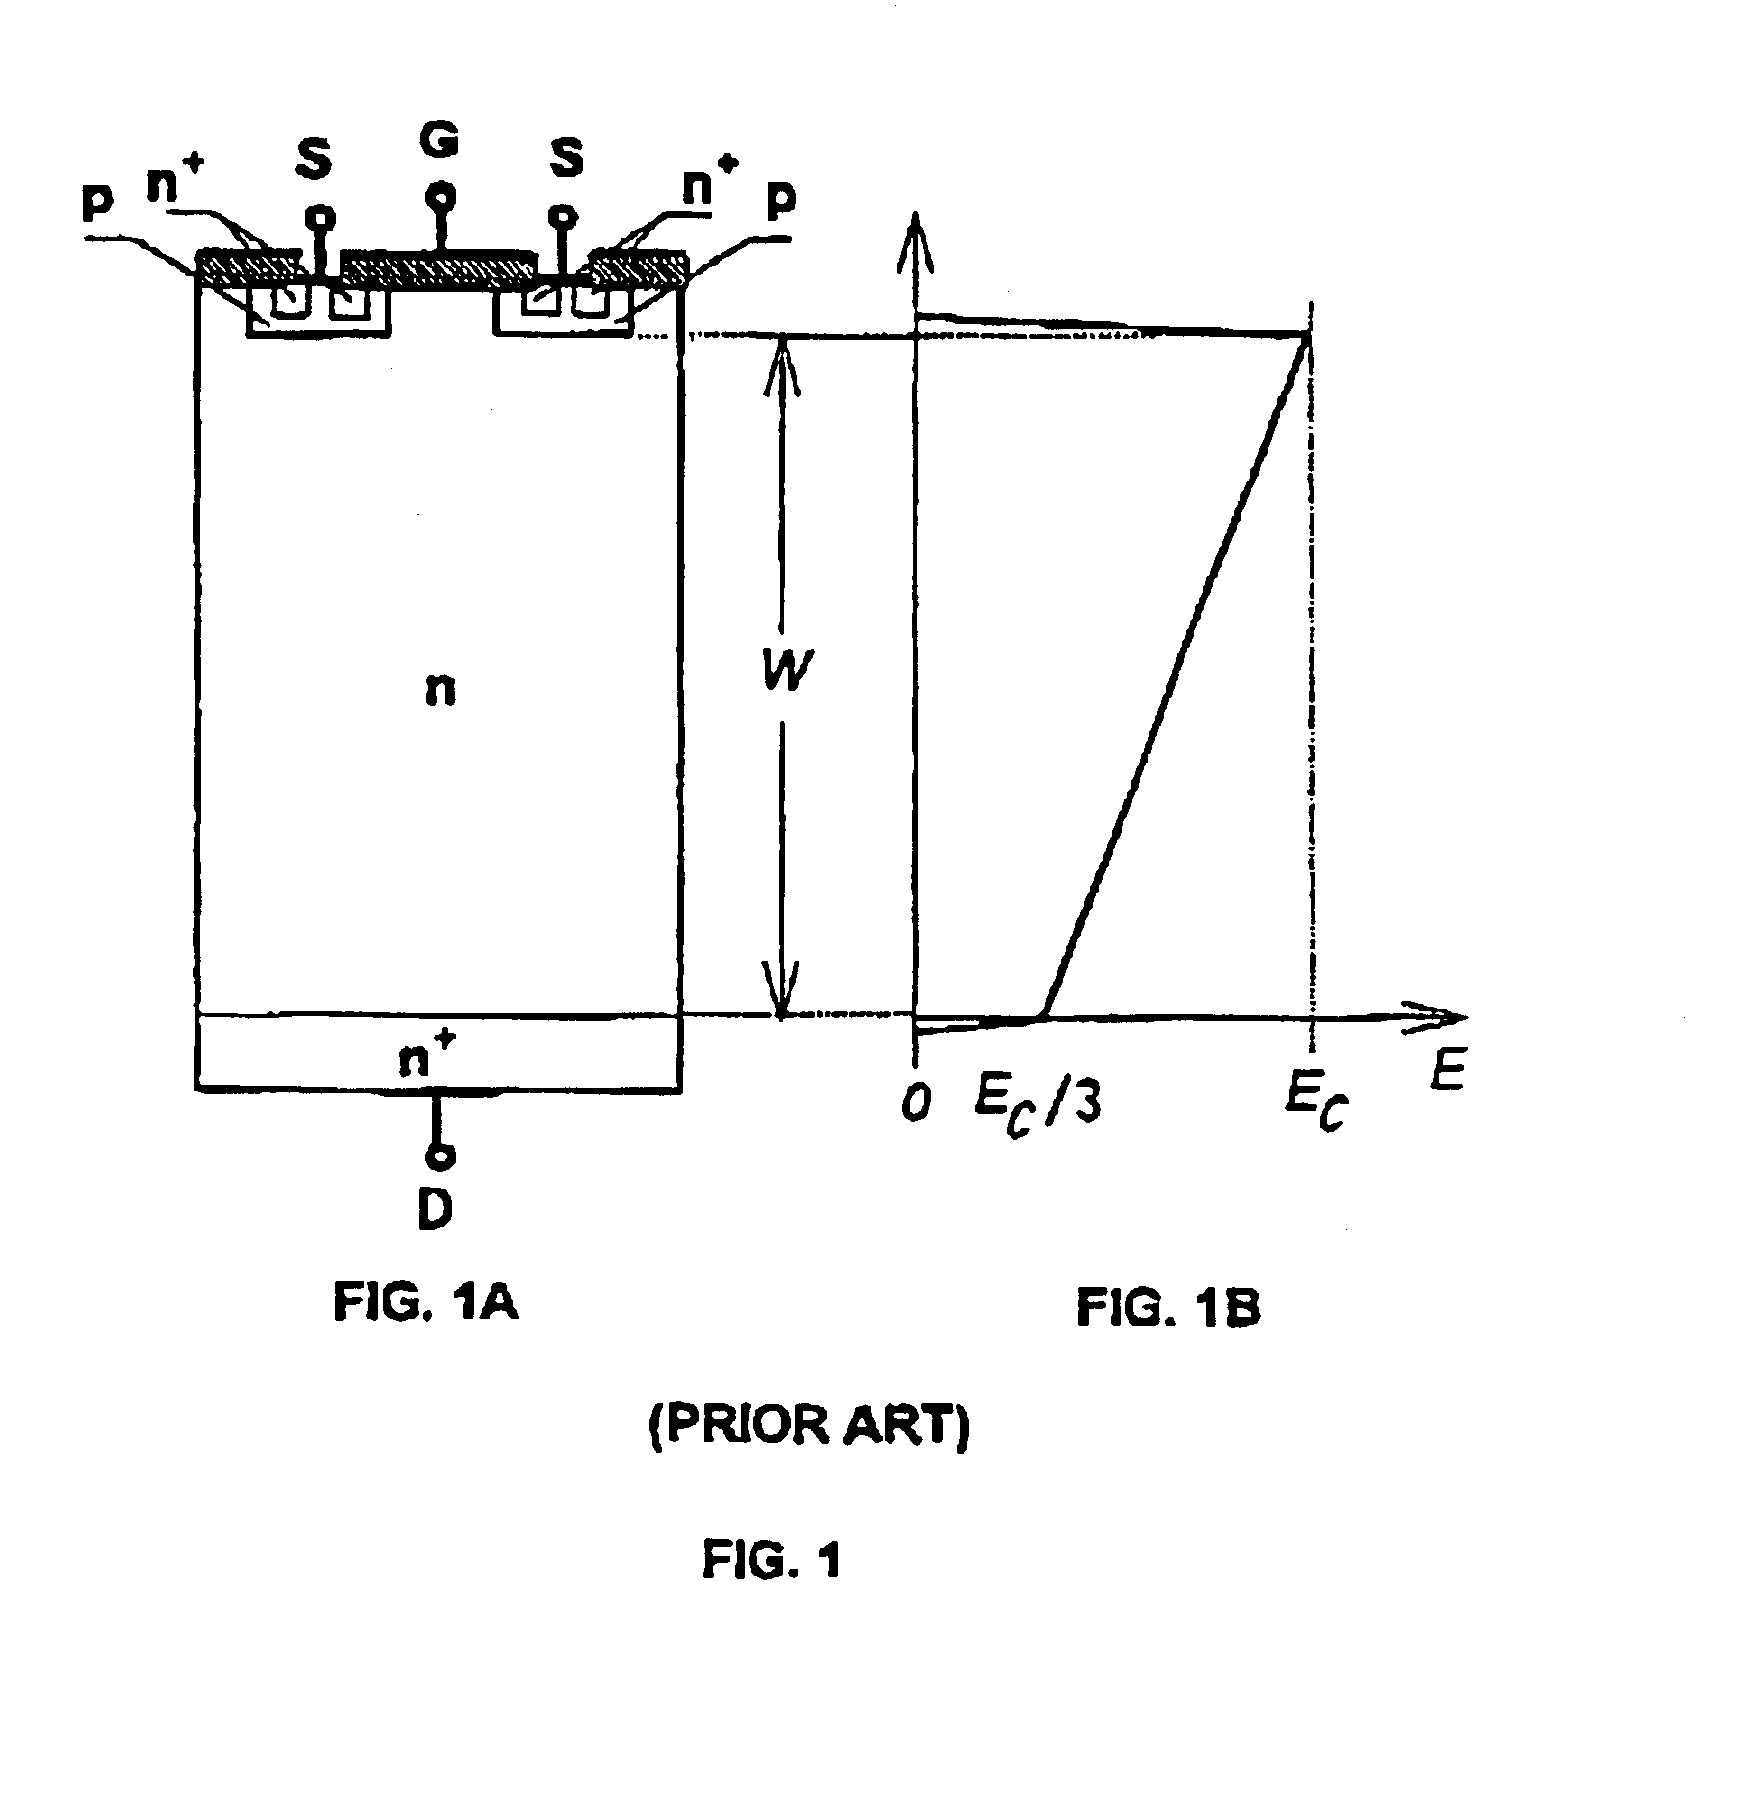 Semiconductor high-voltage devices